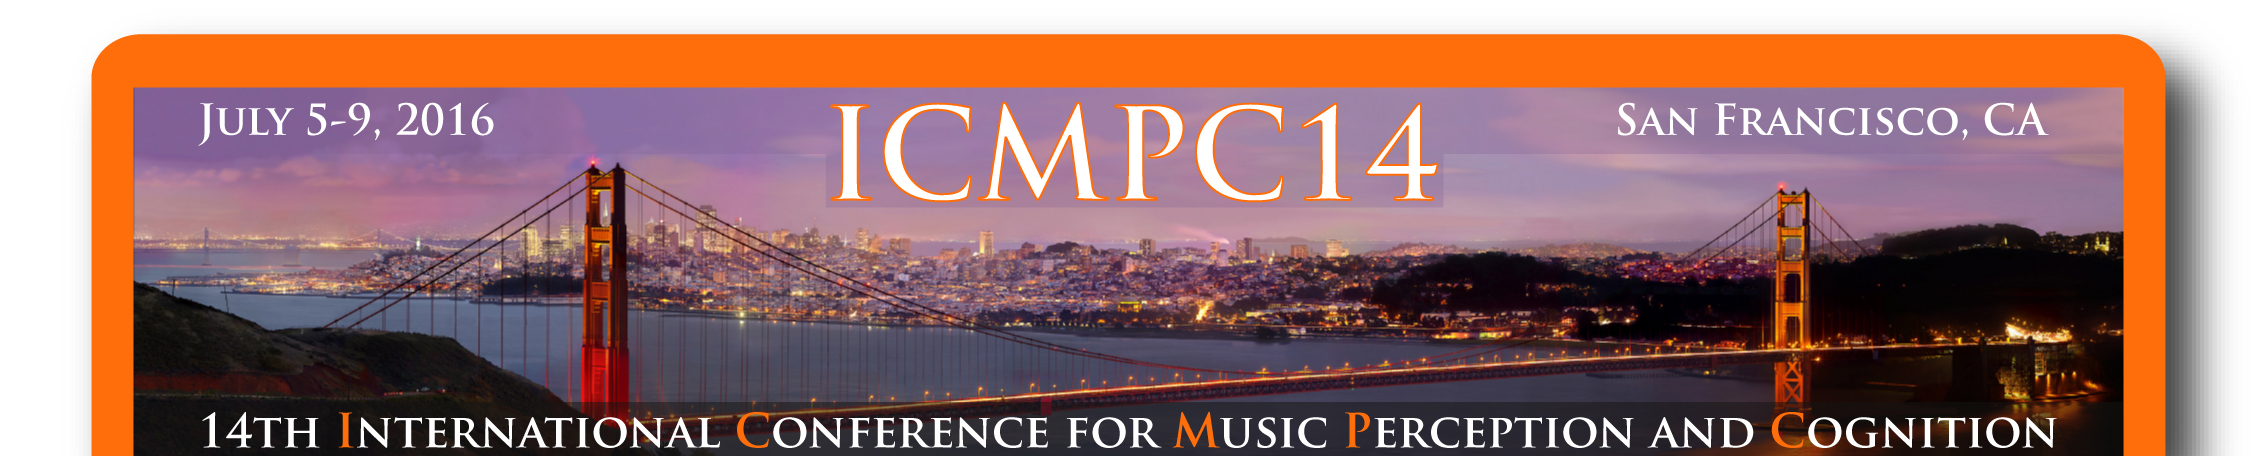 International Conference for Music Perception and Cognition 2016